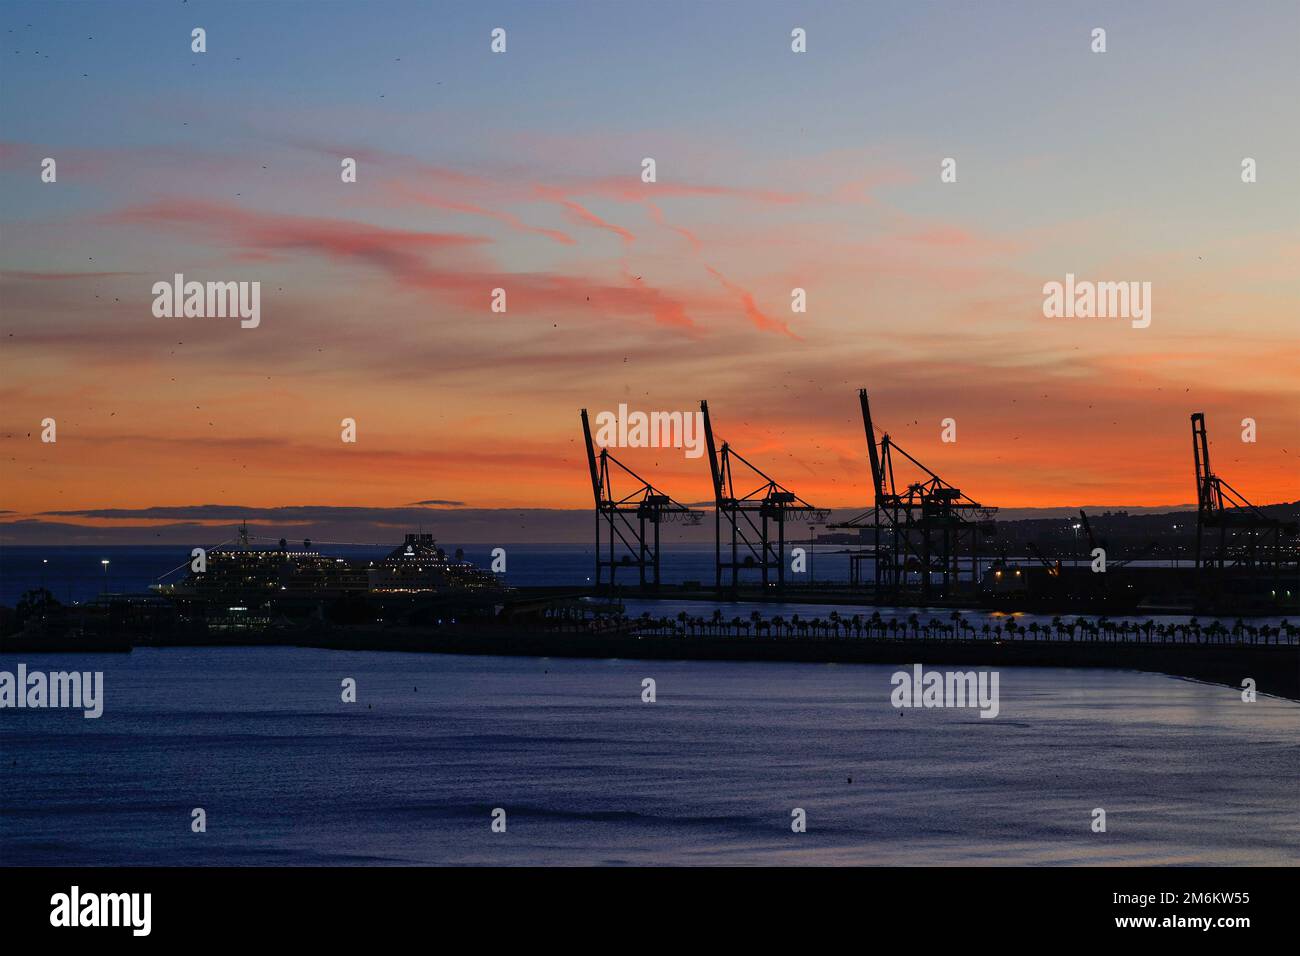 Sunset view with silhouette of industrial cranes in Malaga port, Andalucia,Spain. Stock Photo